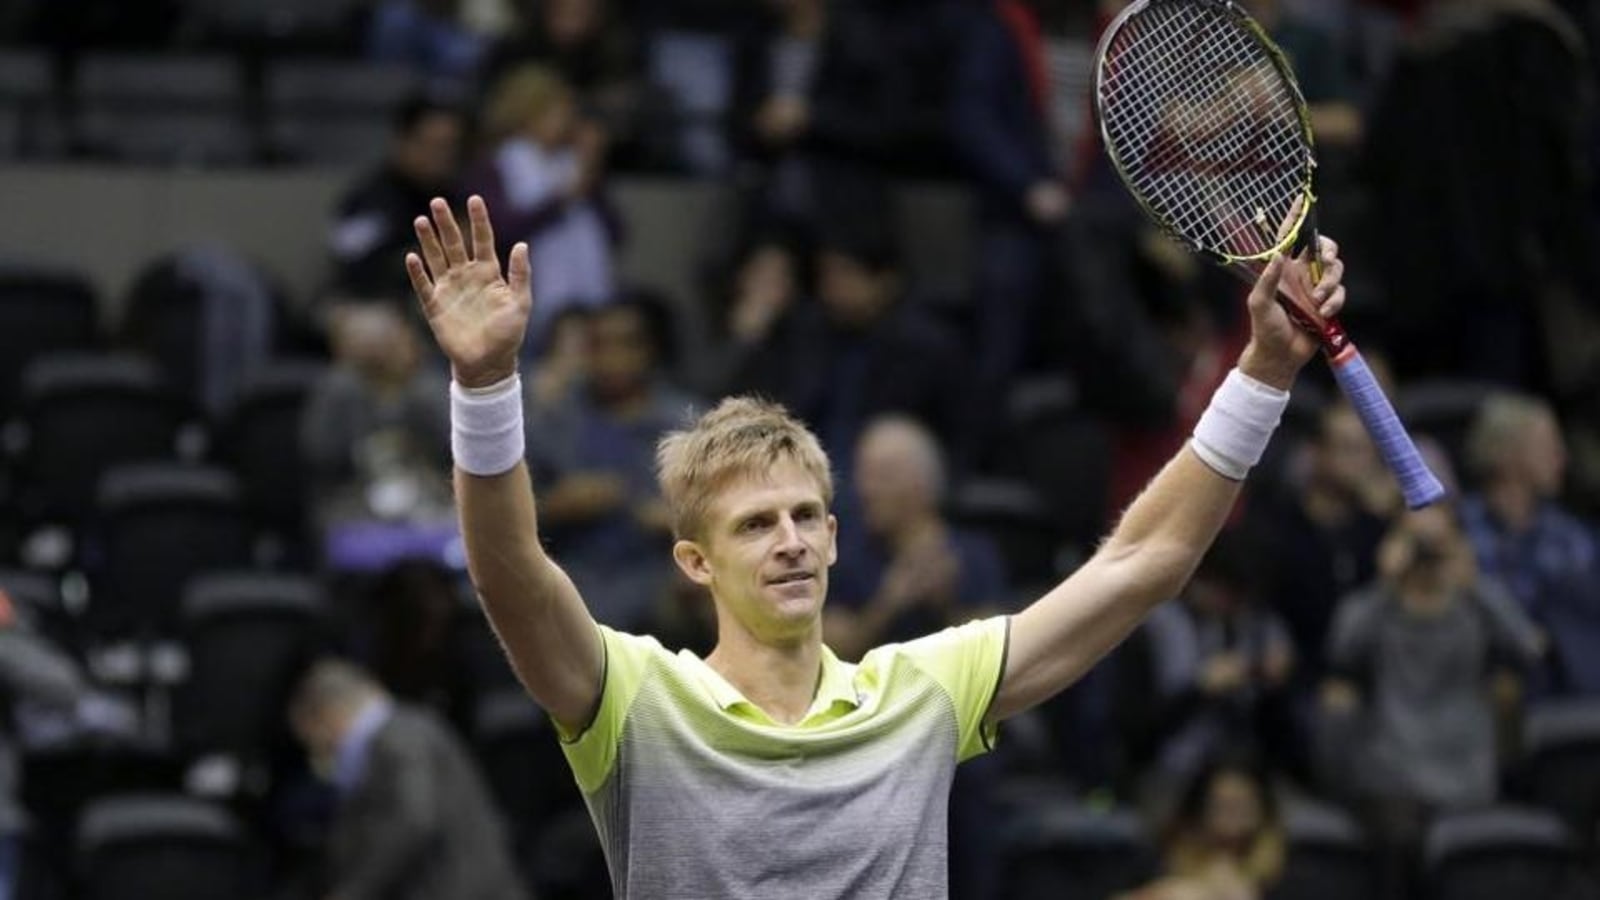 ‘I gave it my best’: Former Wimbledon and US Open finalist Kevin Anderson retires at 35